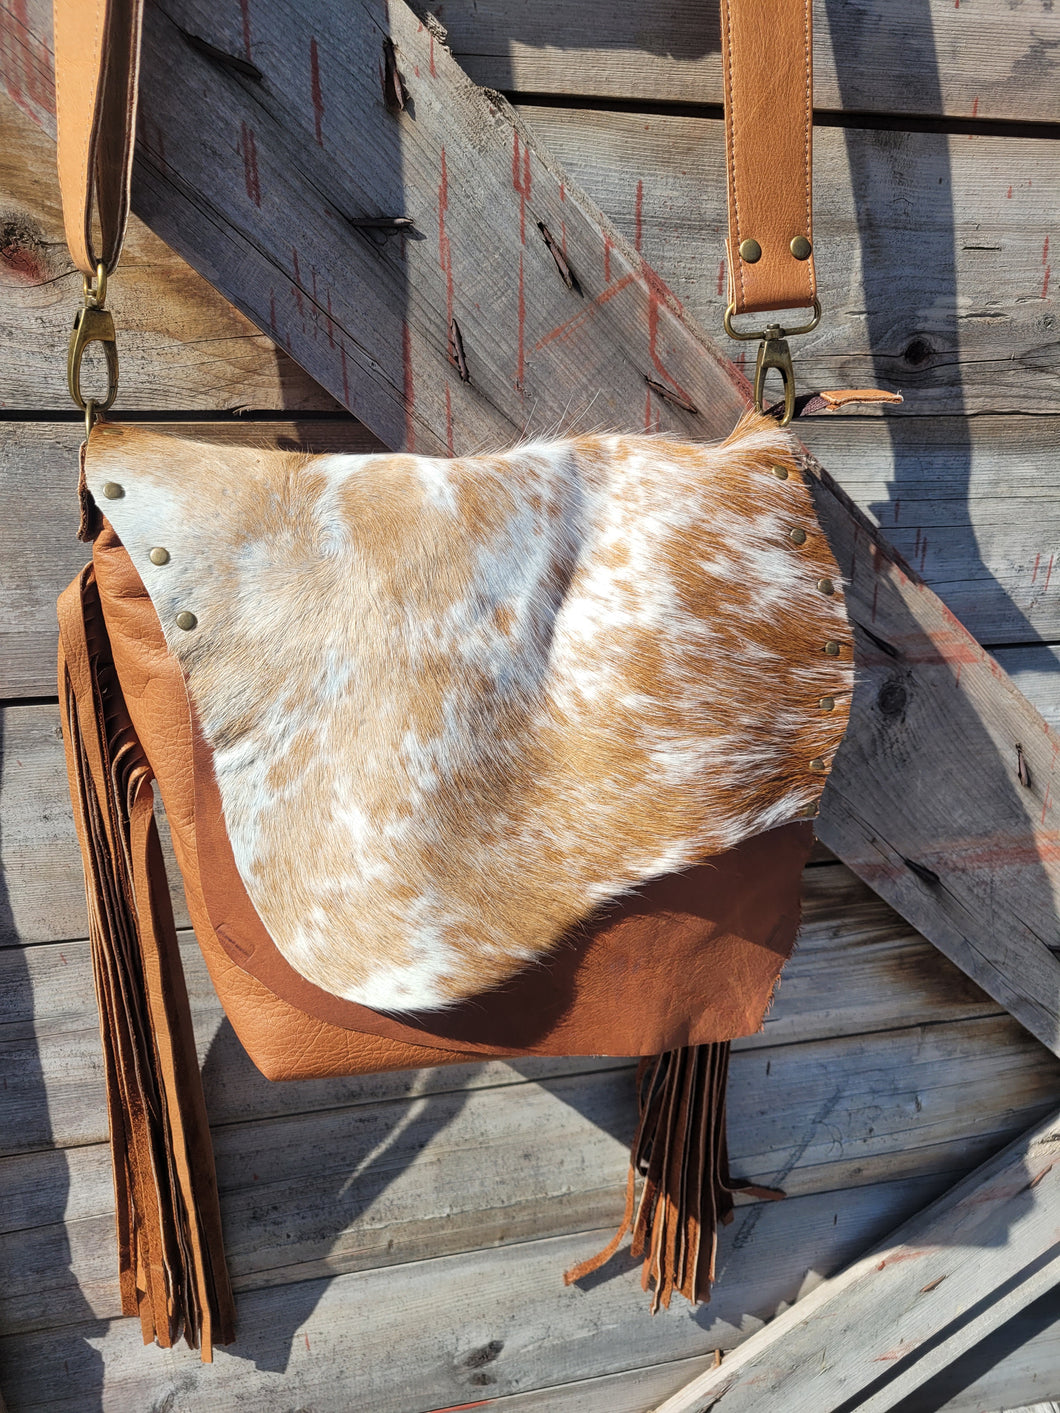 Tanya - Cowhide and Leather Purse